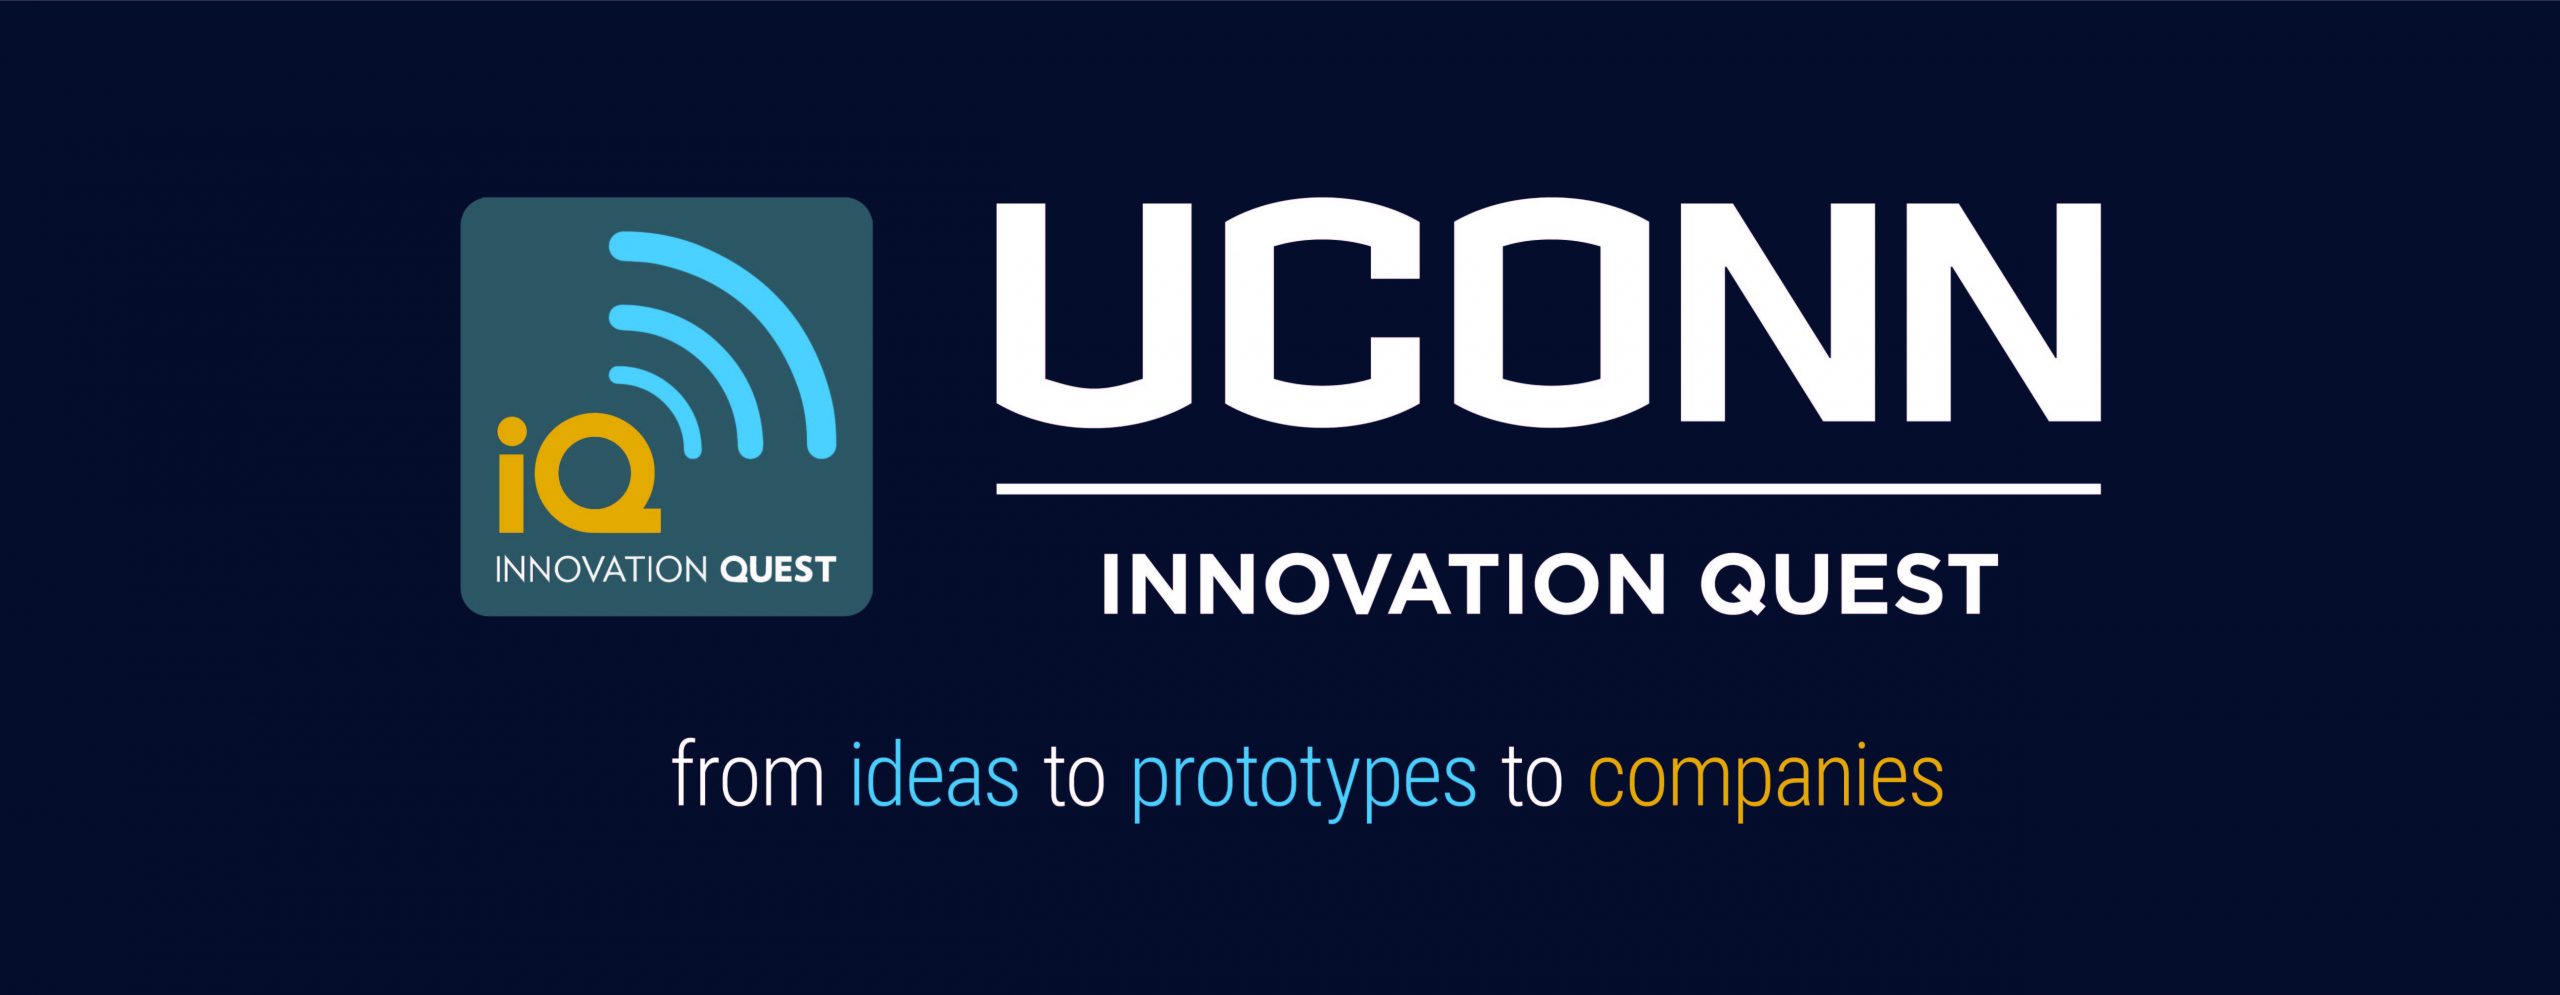 UConn Innovation Quest iQ from ideas to prototypes to companies